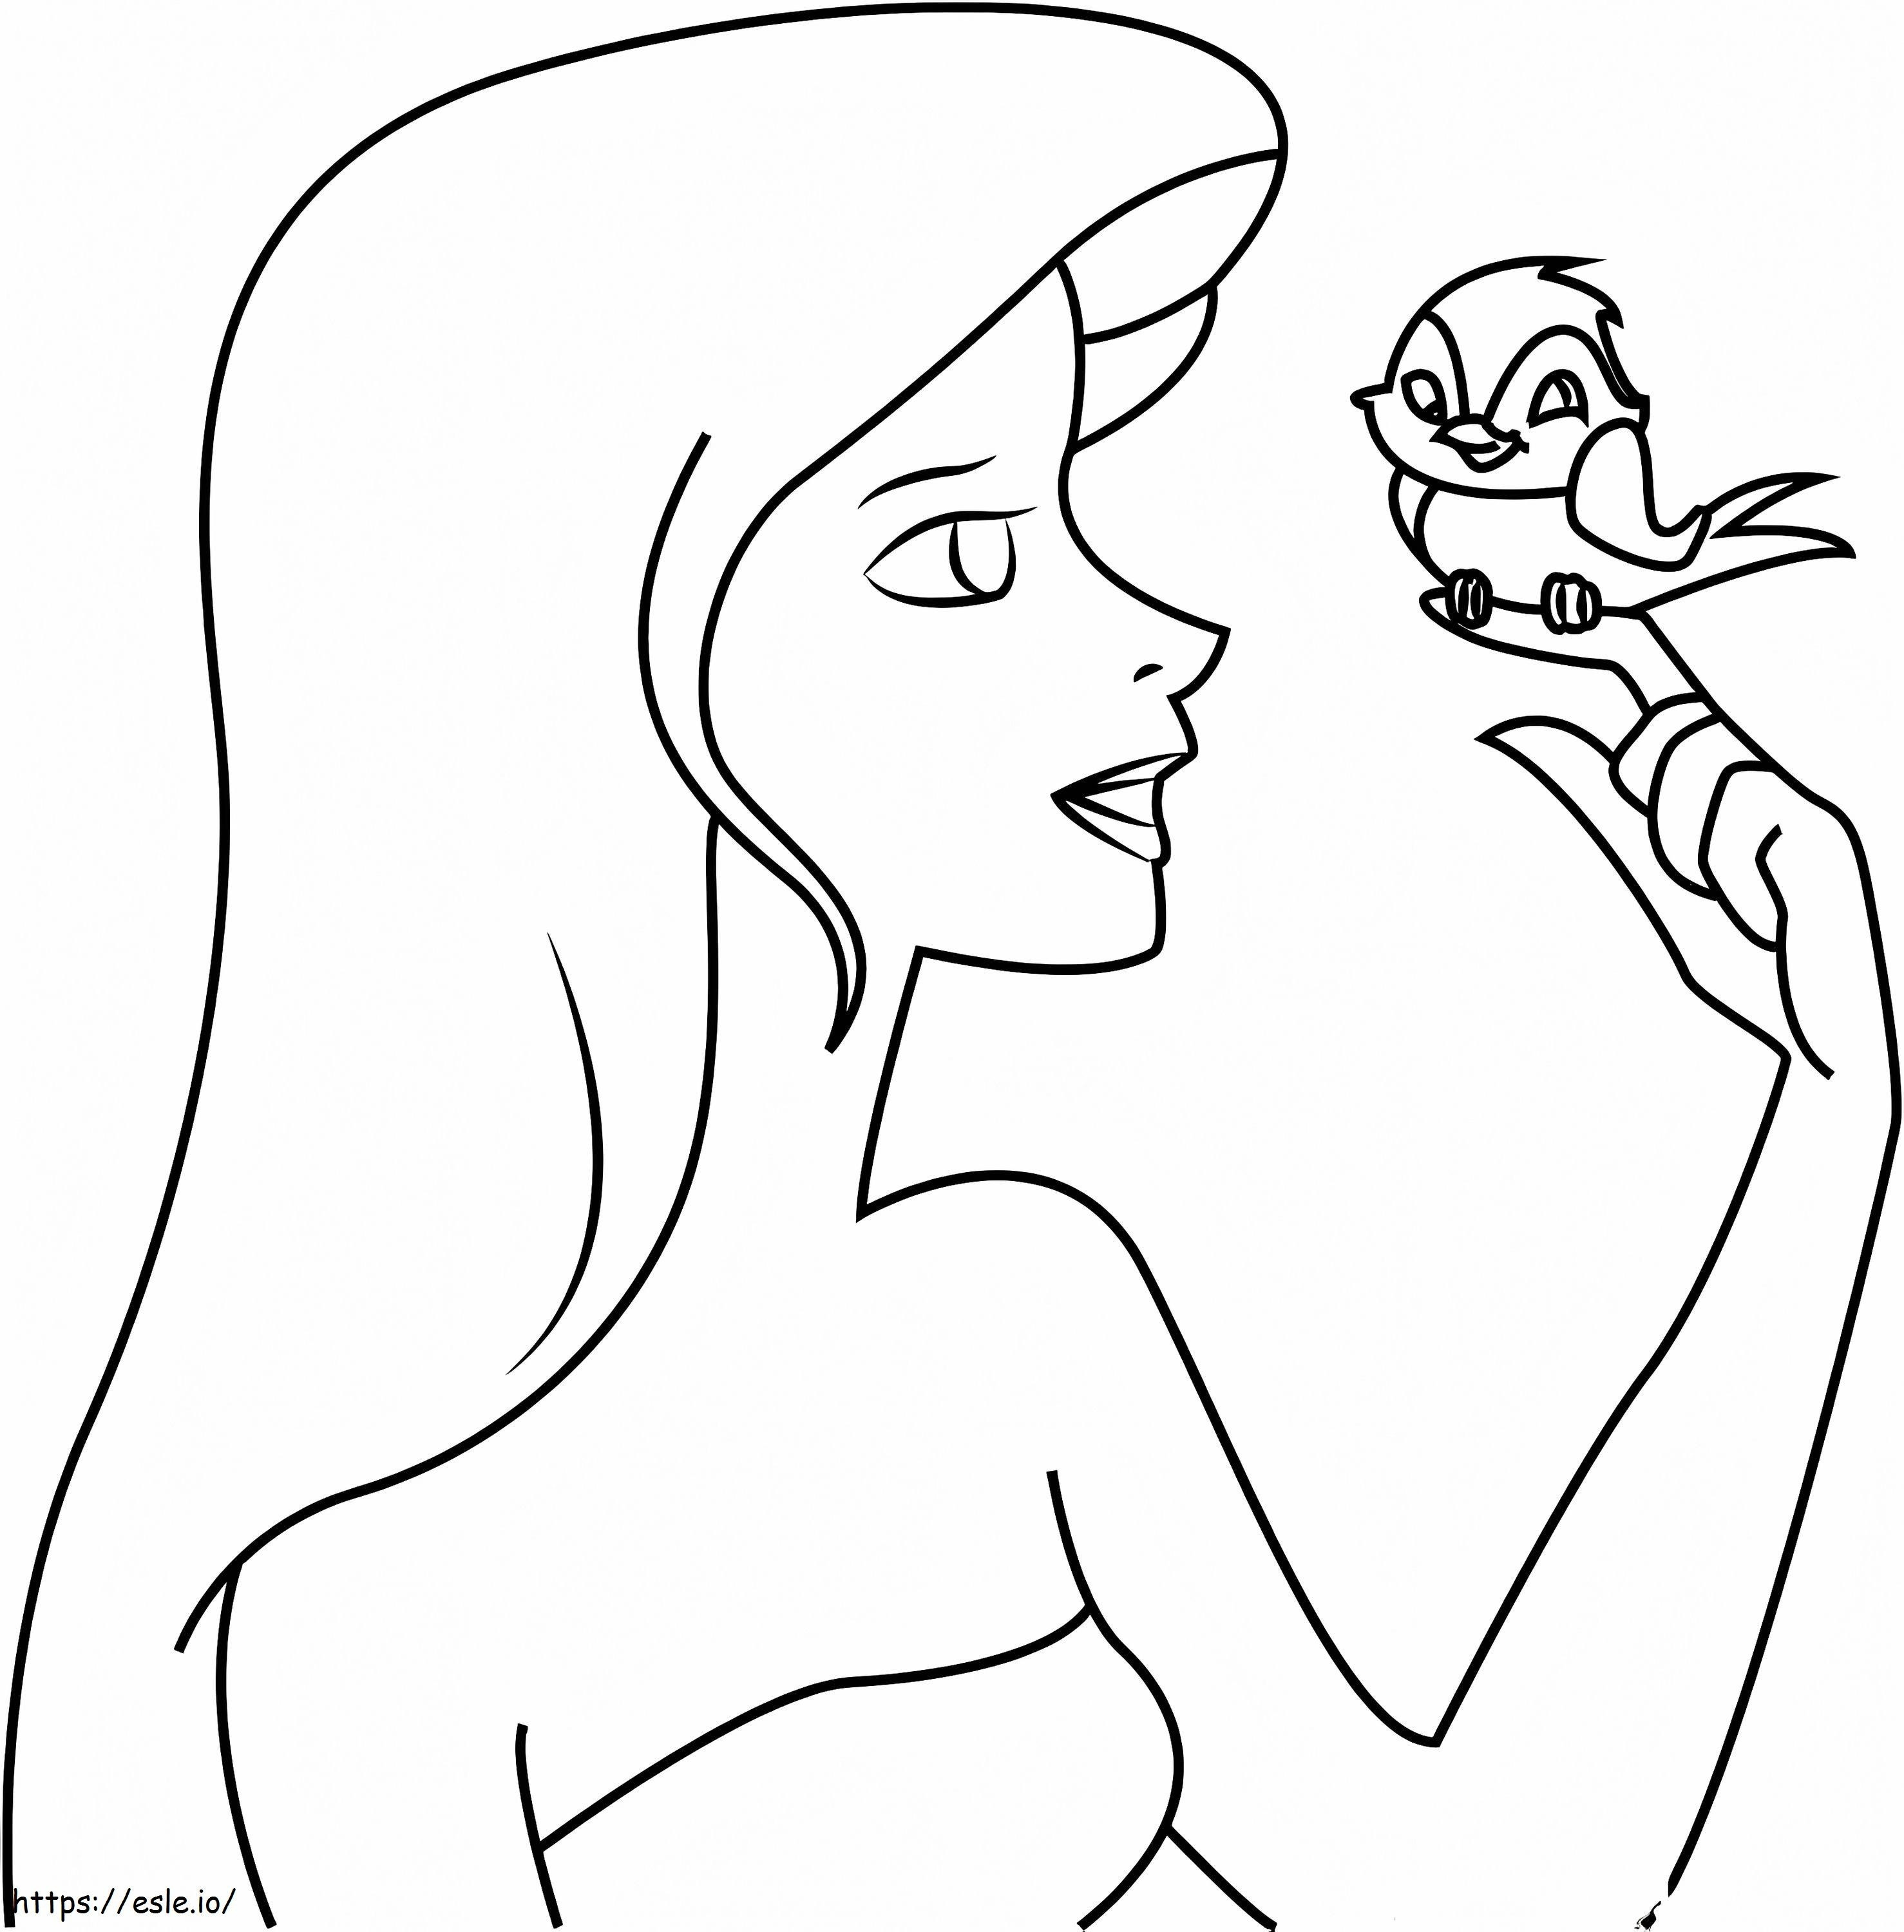 Giselle Holding Bird coloring page